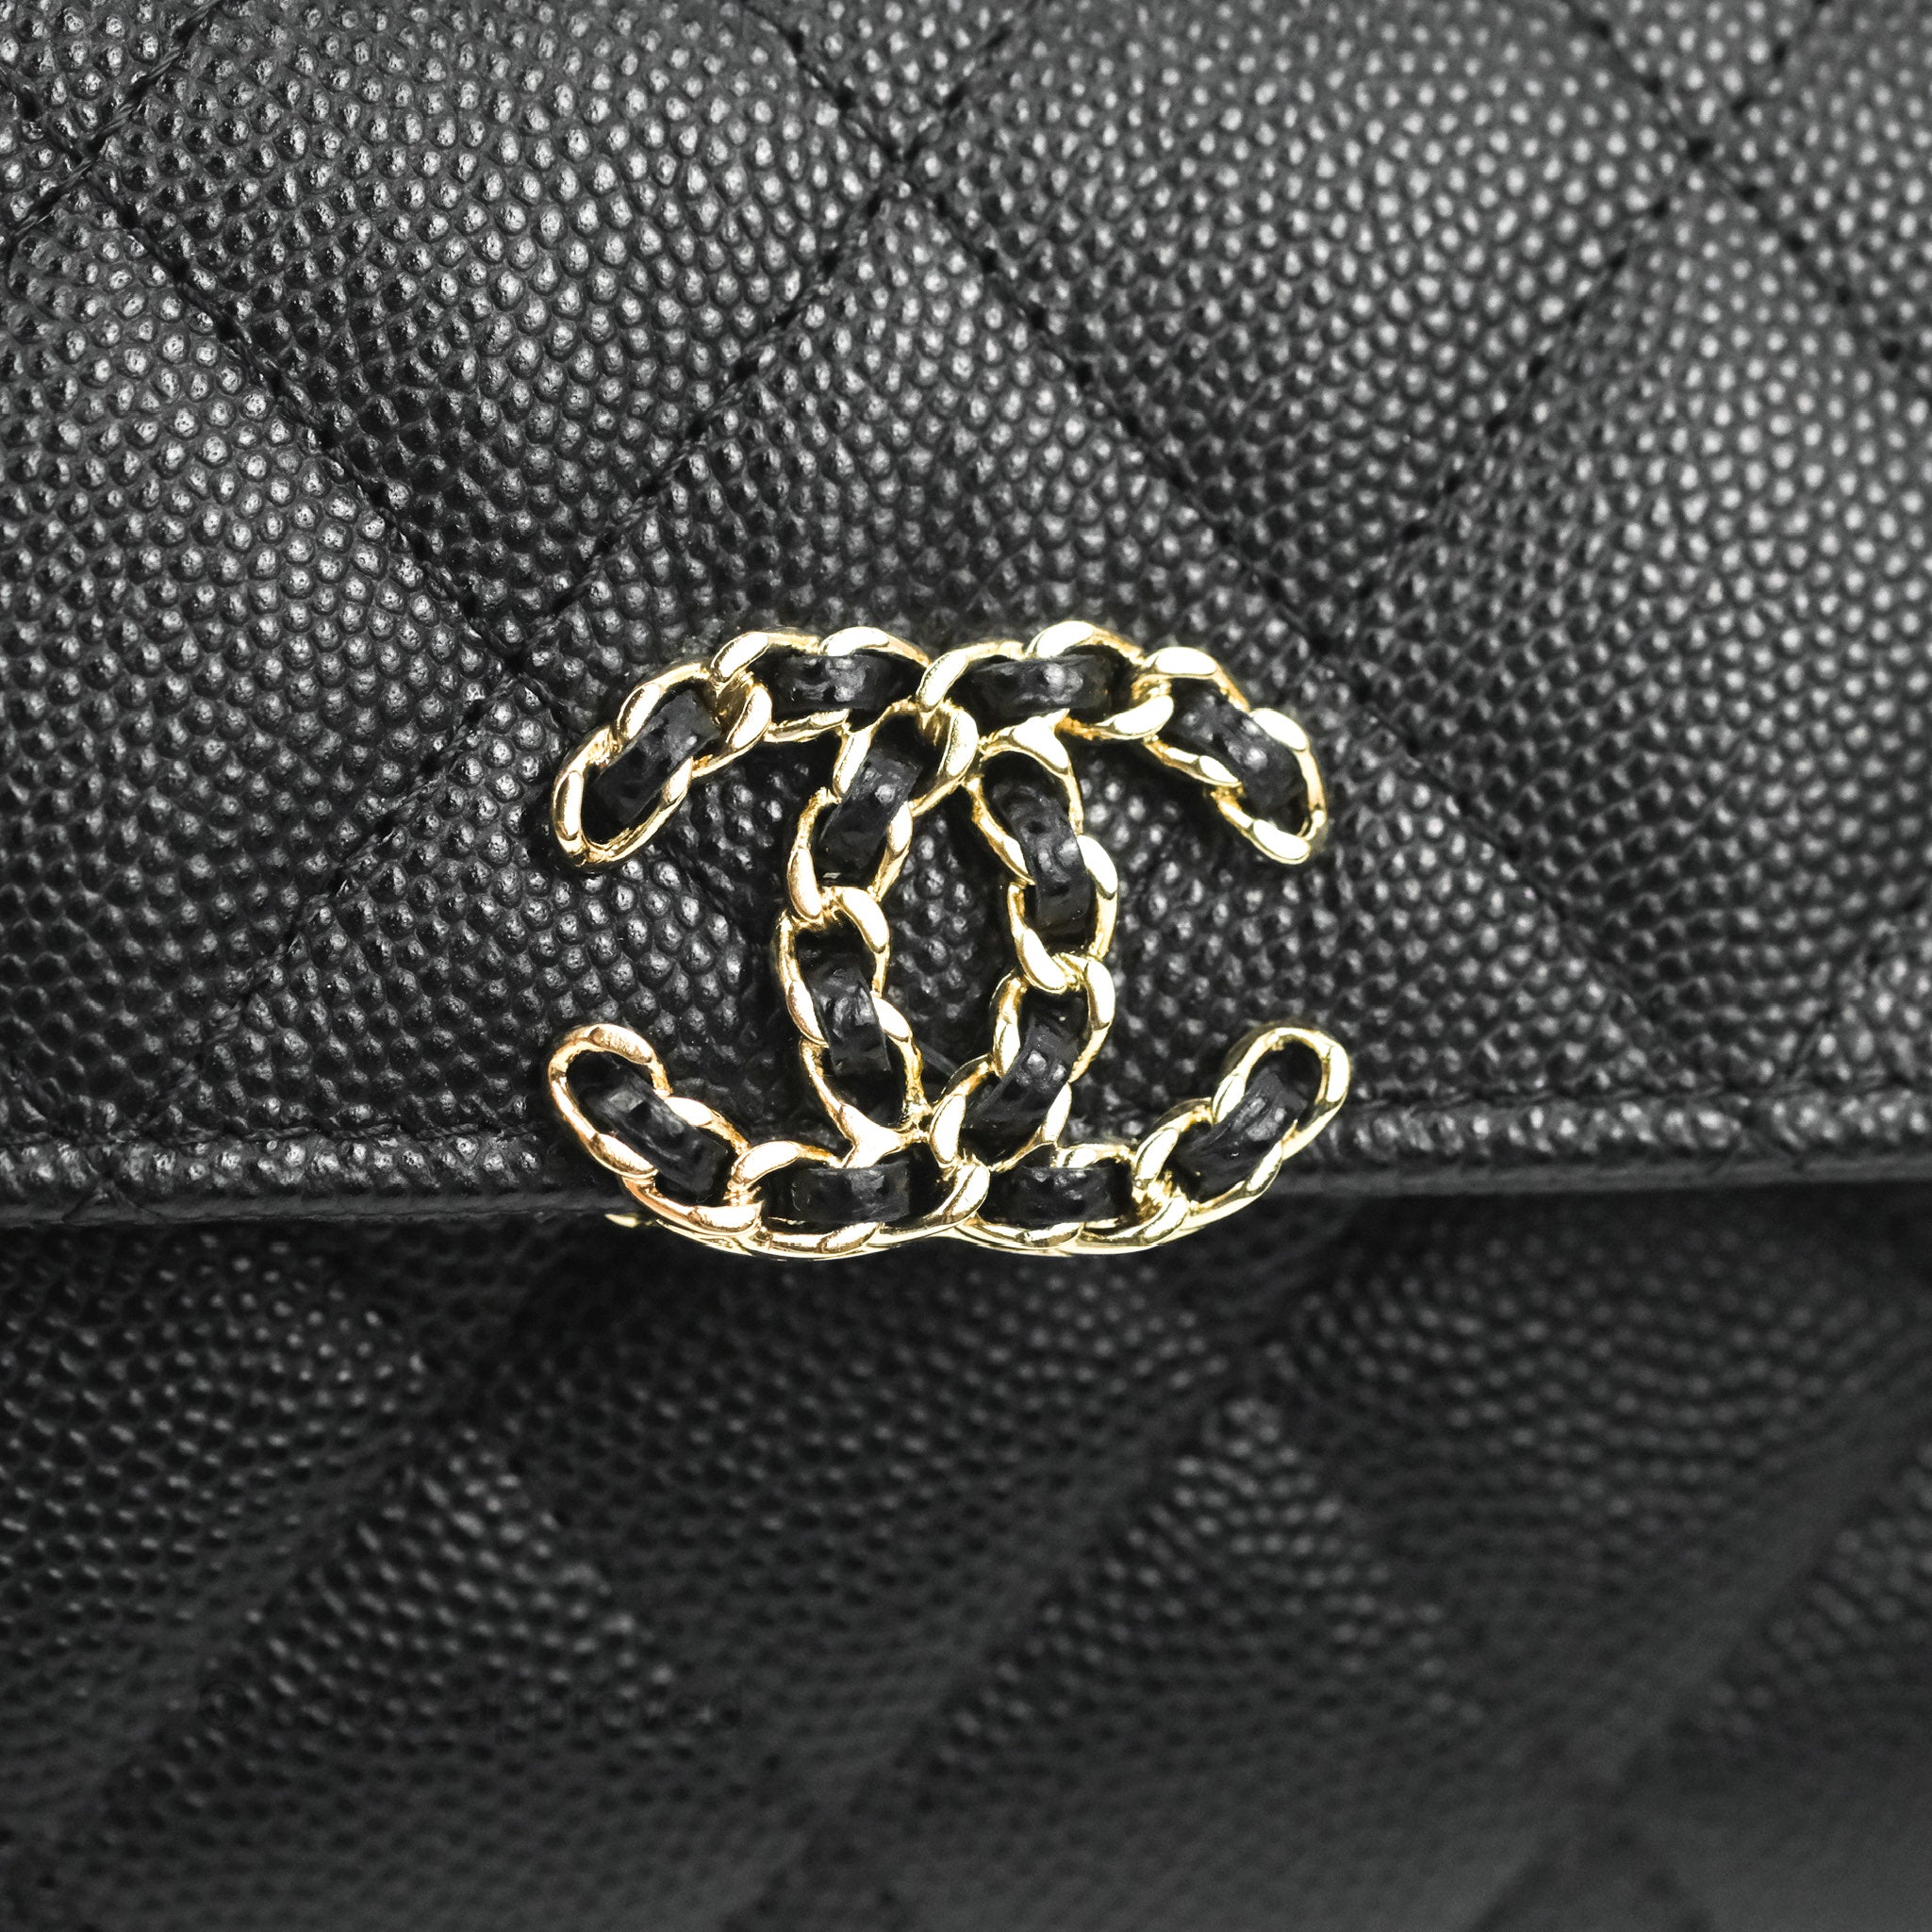 Chanel 23P Top Handle Clutch on Chain / Wallet on Chain /Crossbody